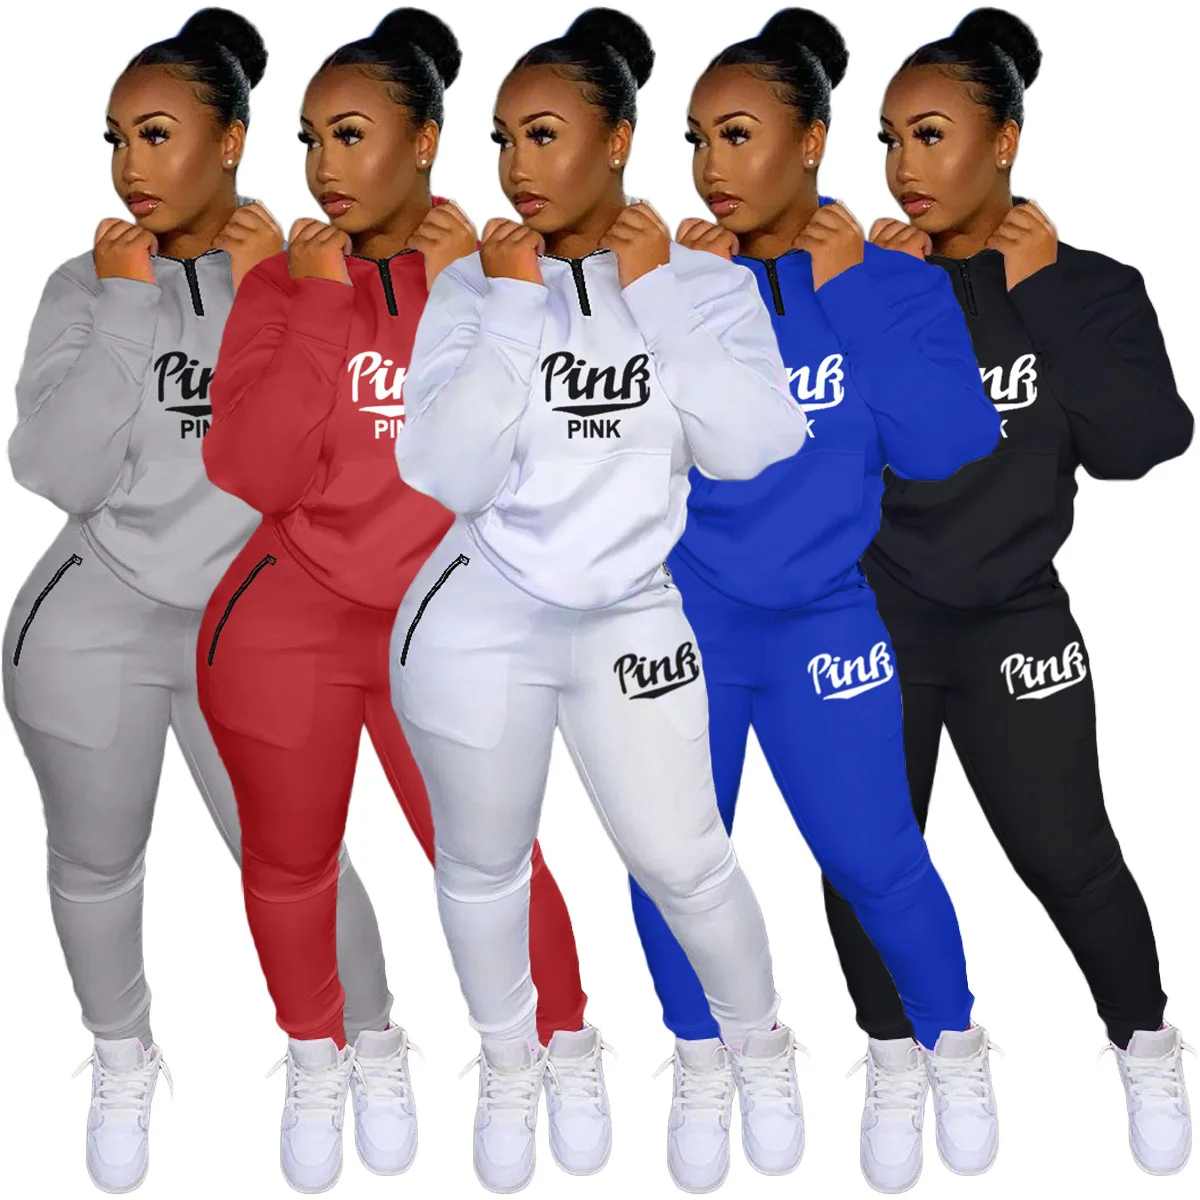 2022 Winter Women Clothing Long Sleeve Tracksuits Sweatsuit 2 Piece Set  Pink Letter Two Piece Leisure Sports Suit - Buy Sports Leisure Suit, Tracksuits For Women Winter,Women Long Sleeve 2 Piece Set Sport